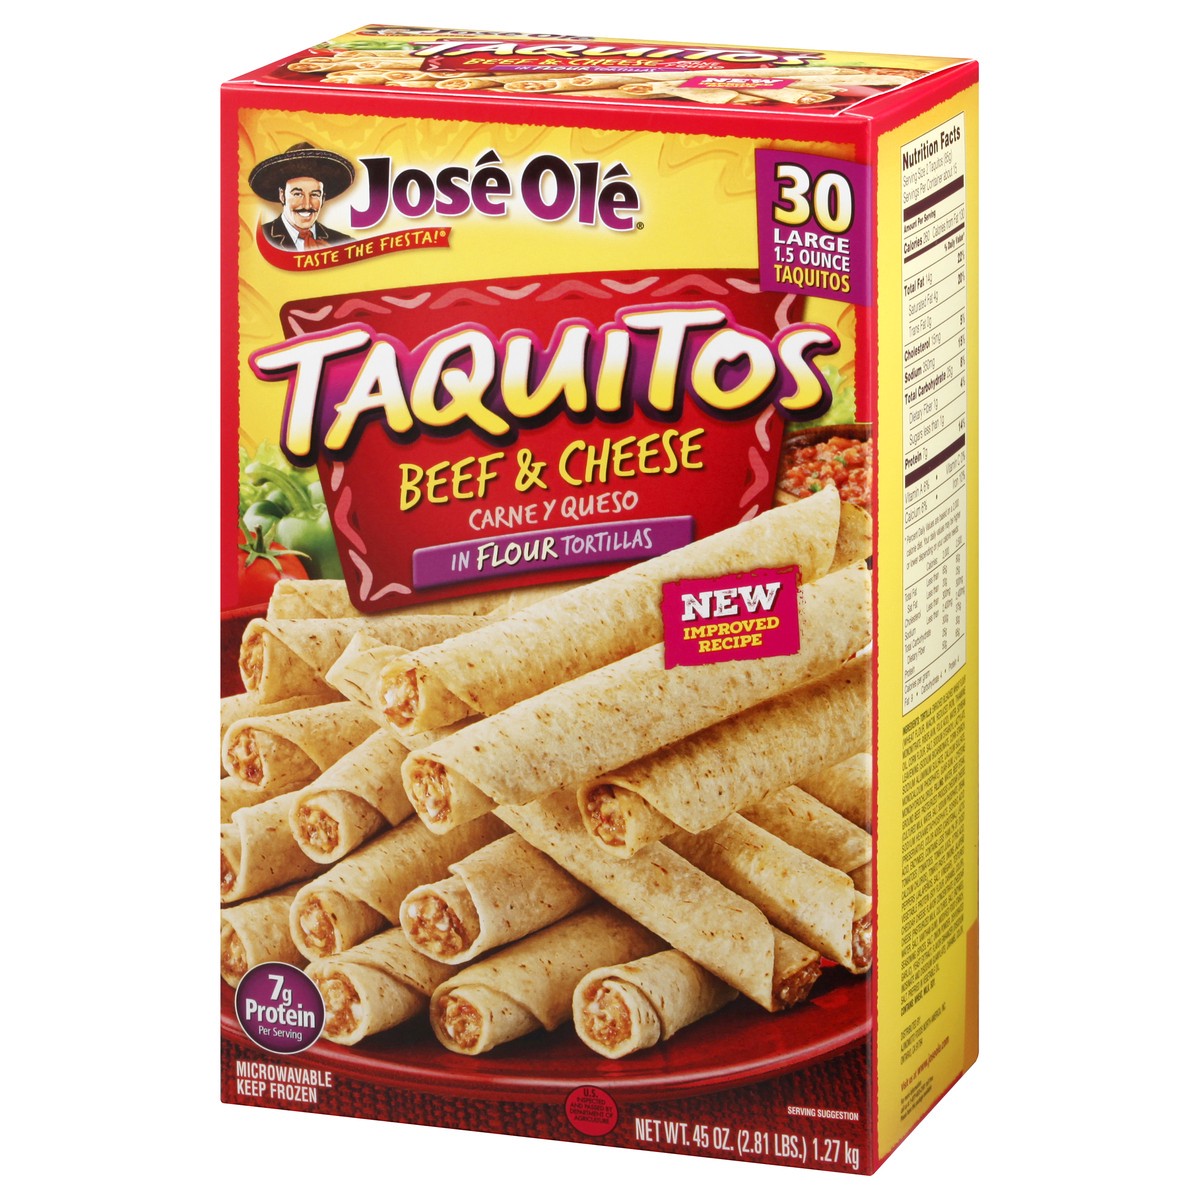 slide 3 of 9, José Olé Large Beef & Cheese Taquitos 30 ea, 30 ct